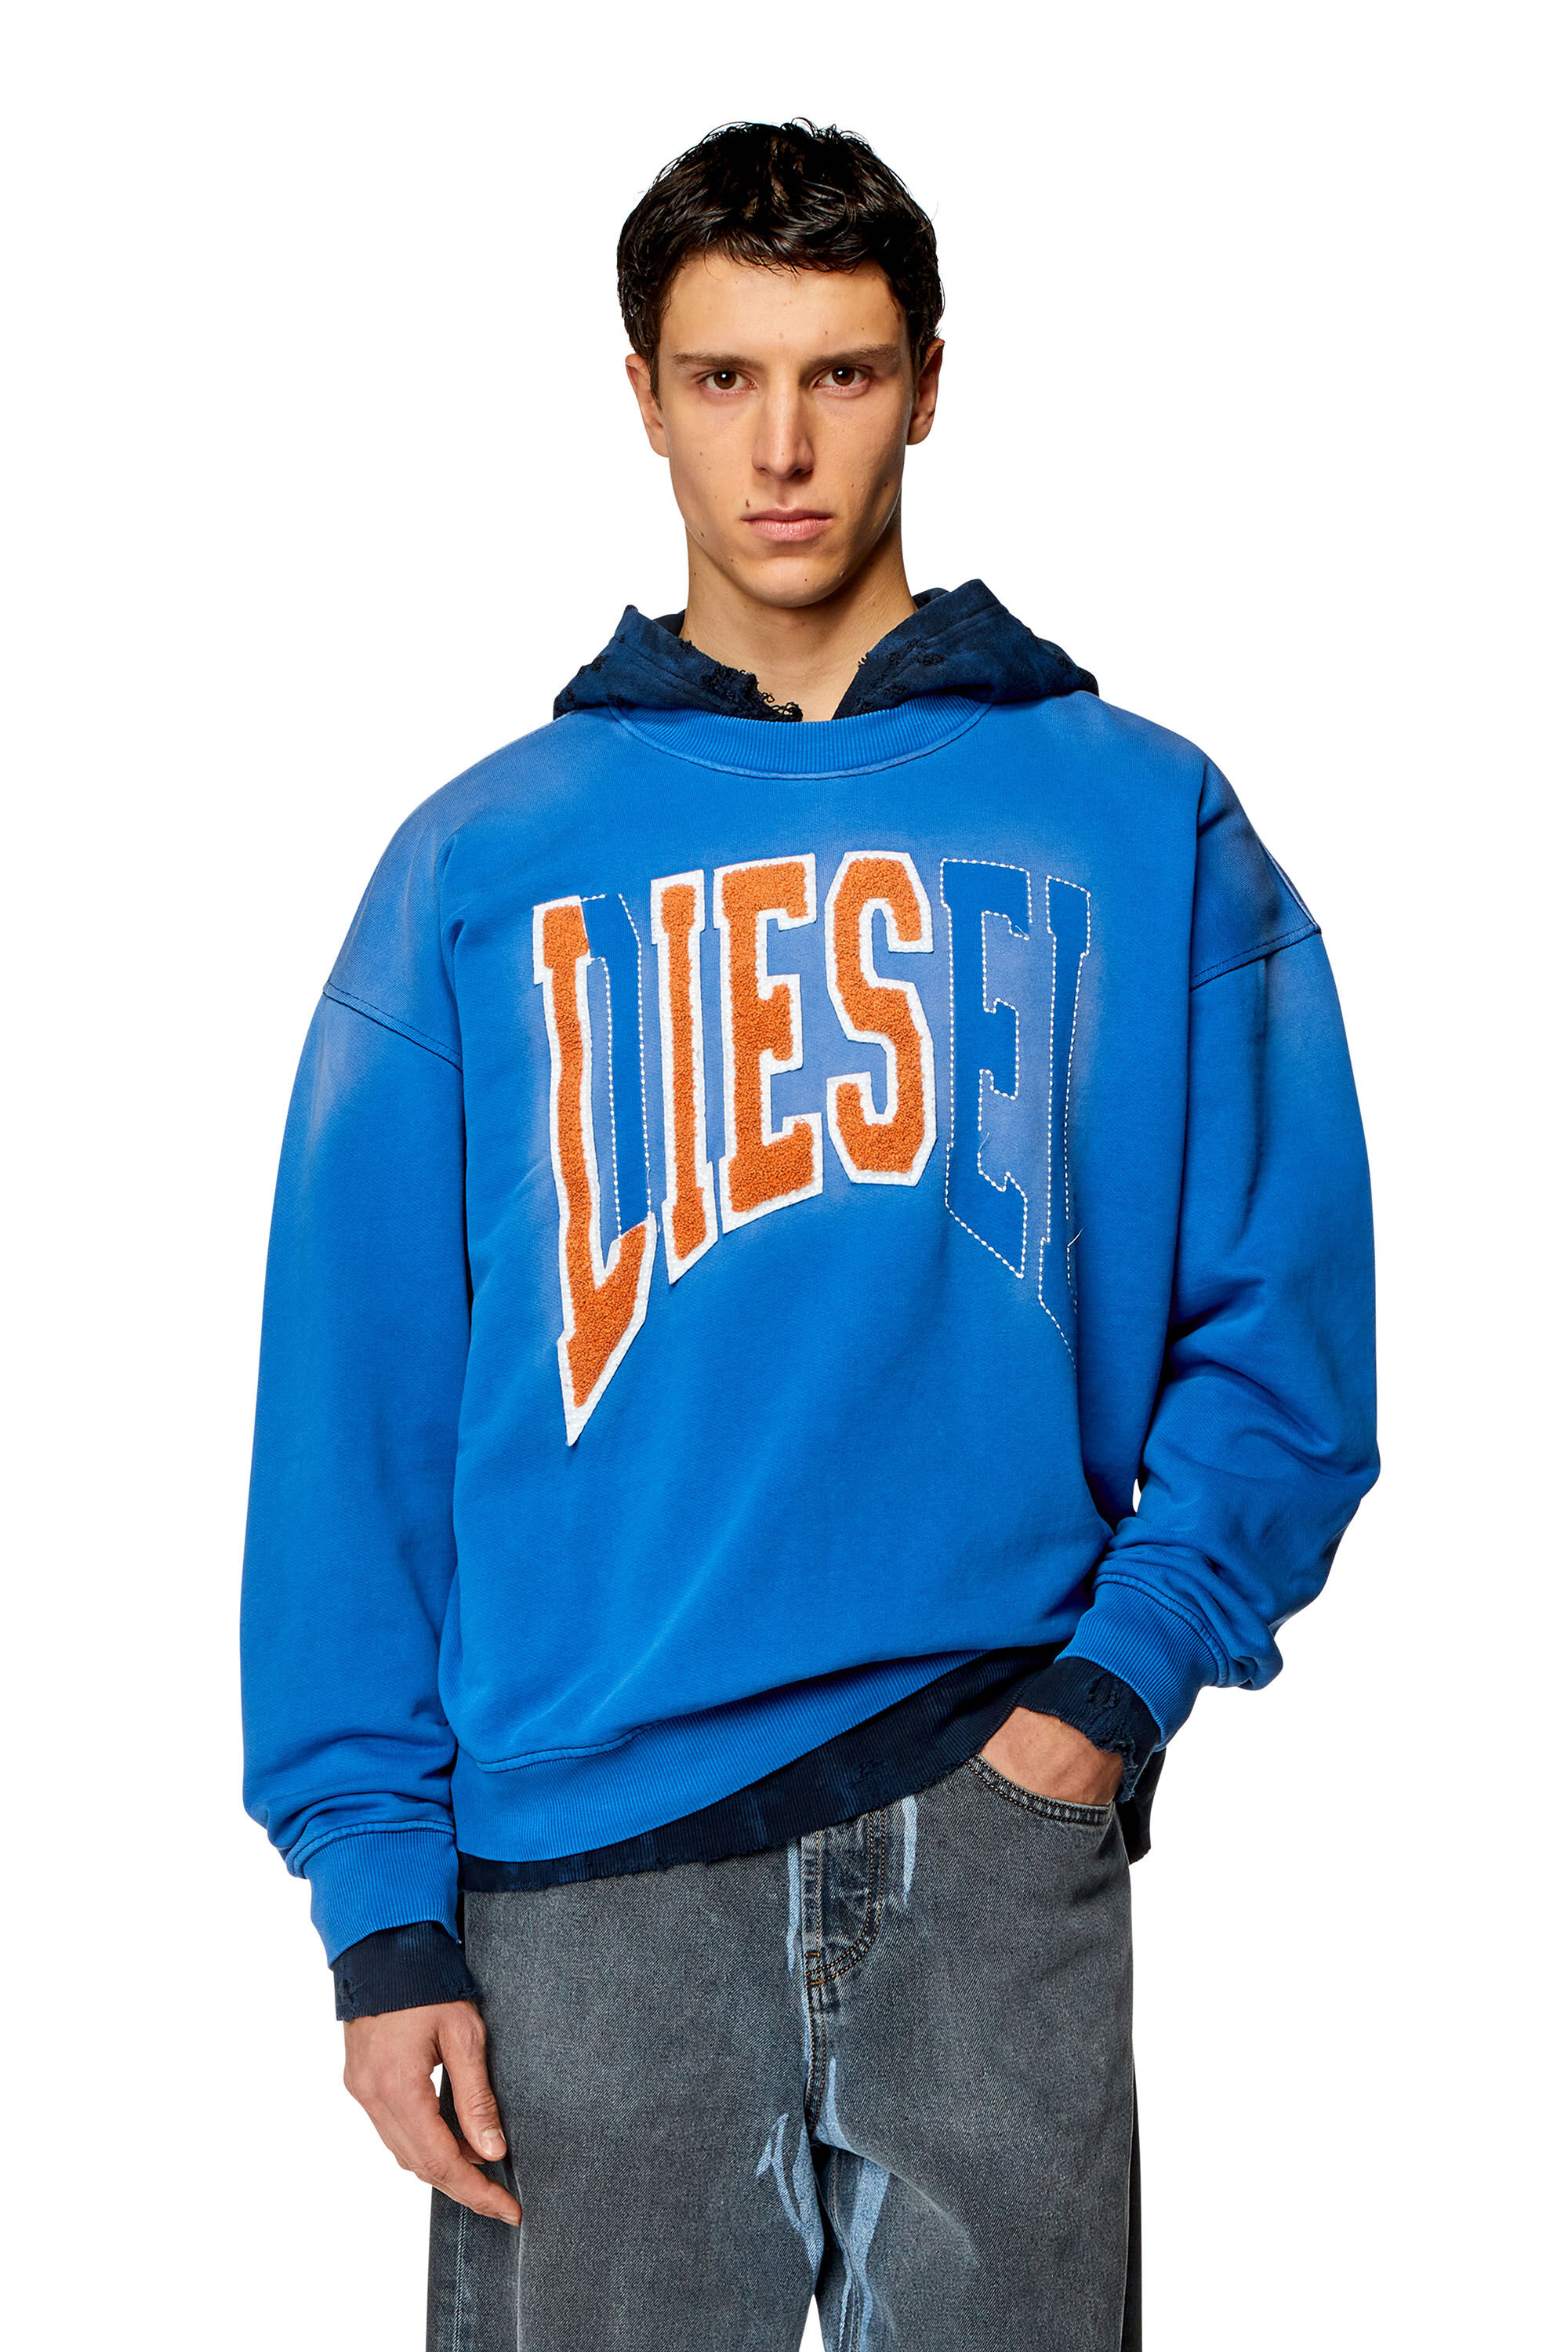 Diesel - S-BOXT-N6, Man College sweatshirt with LIES patches in Blue - Image 3